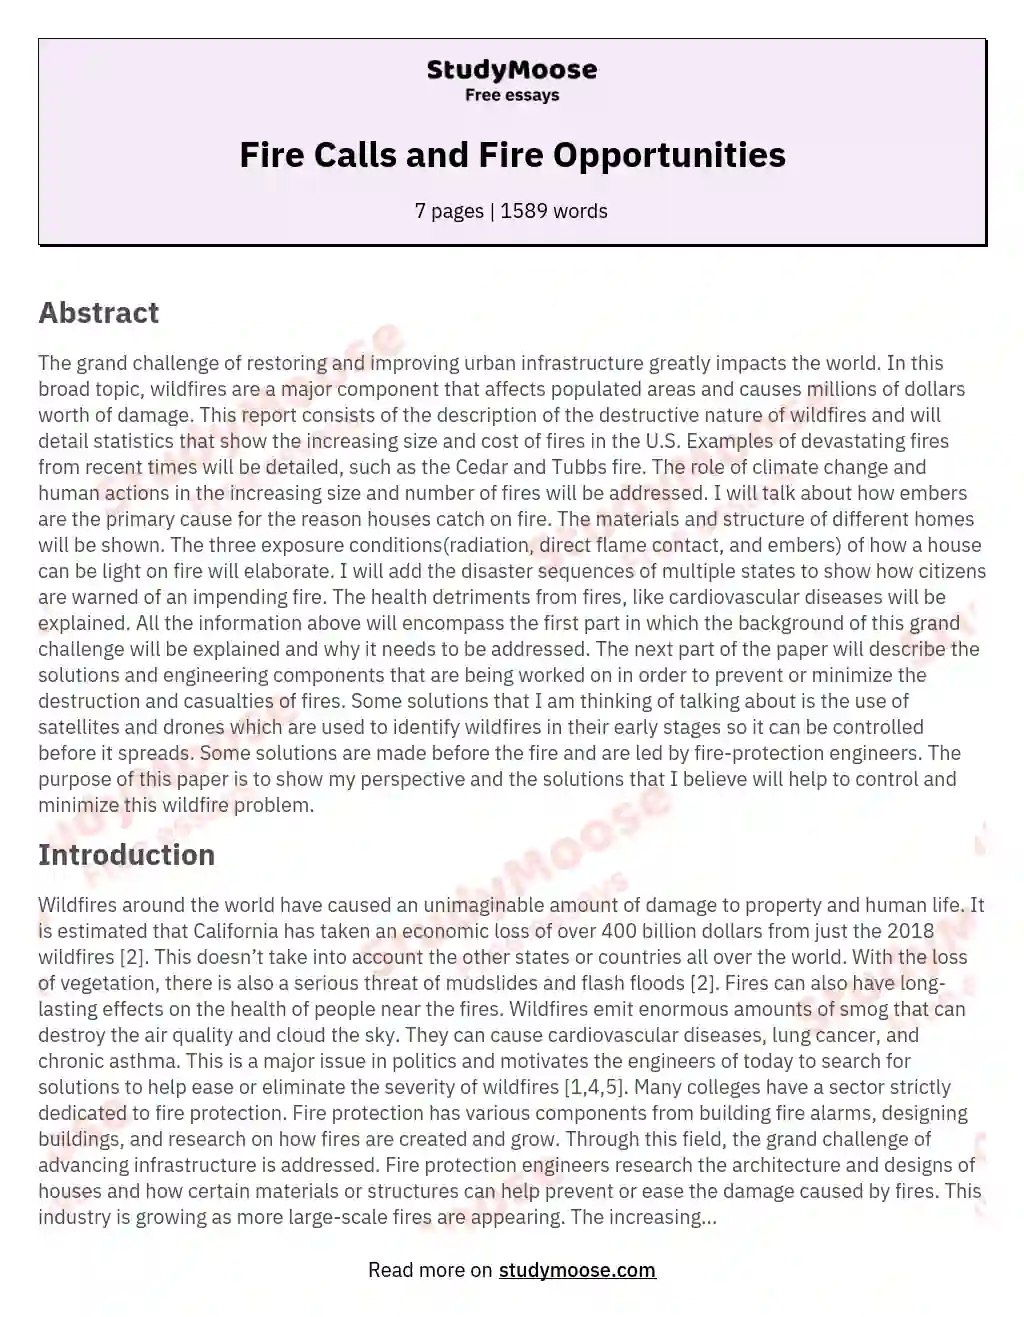 Fire Calls and Fire Opportunities essay